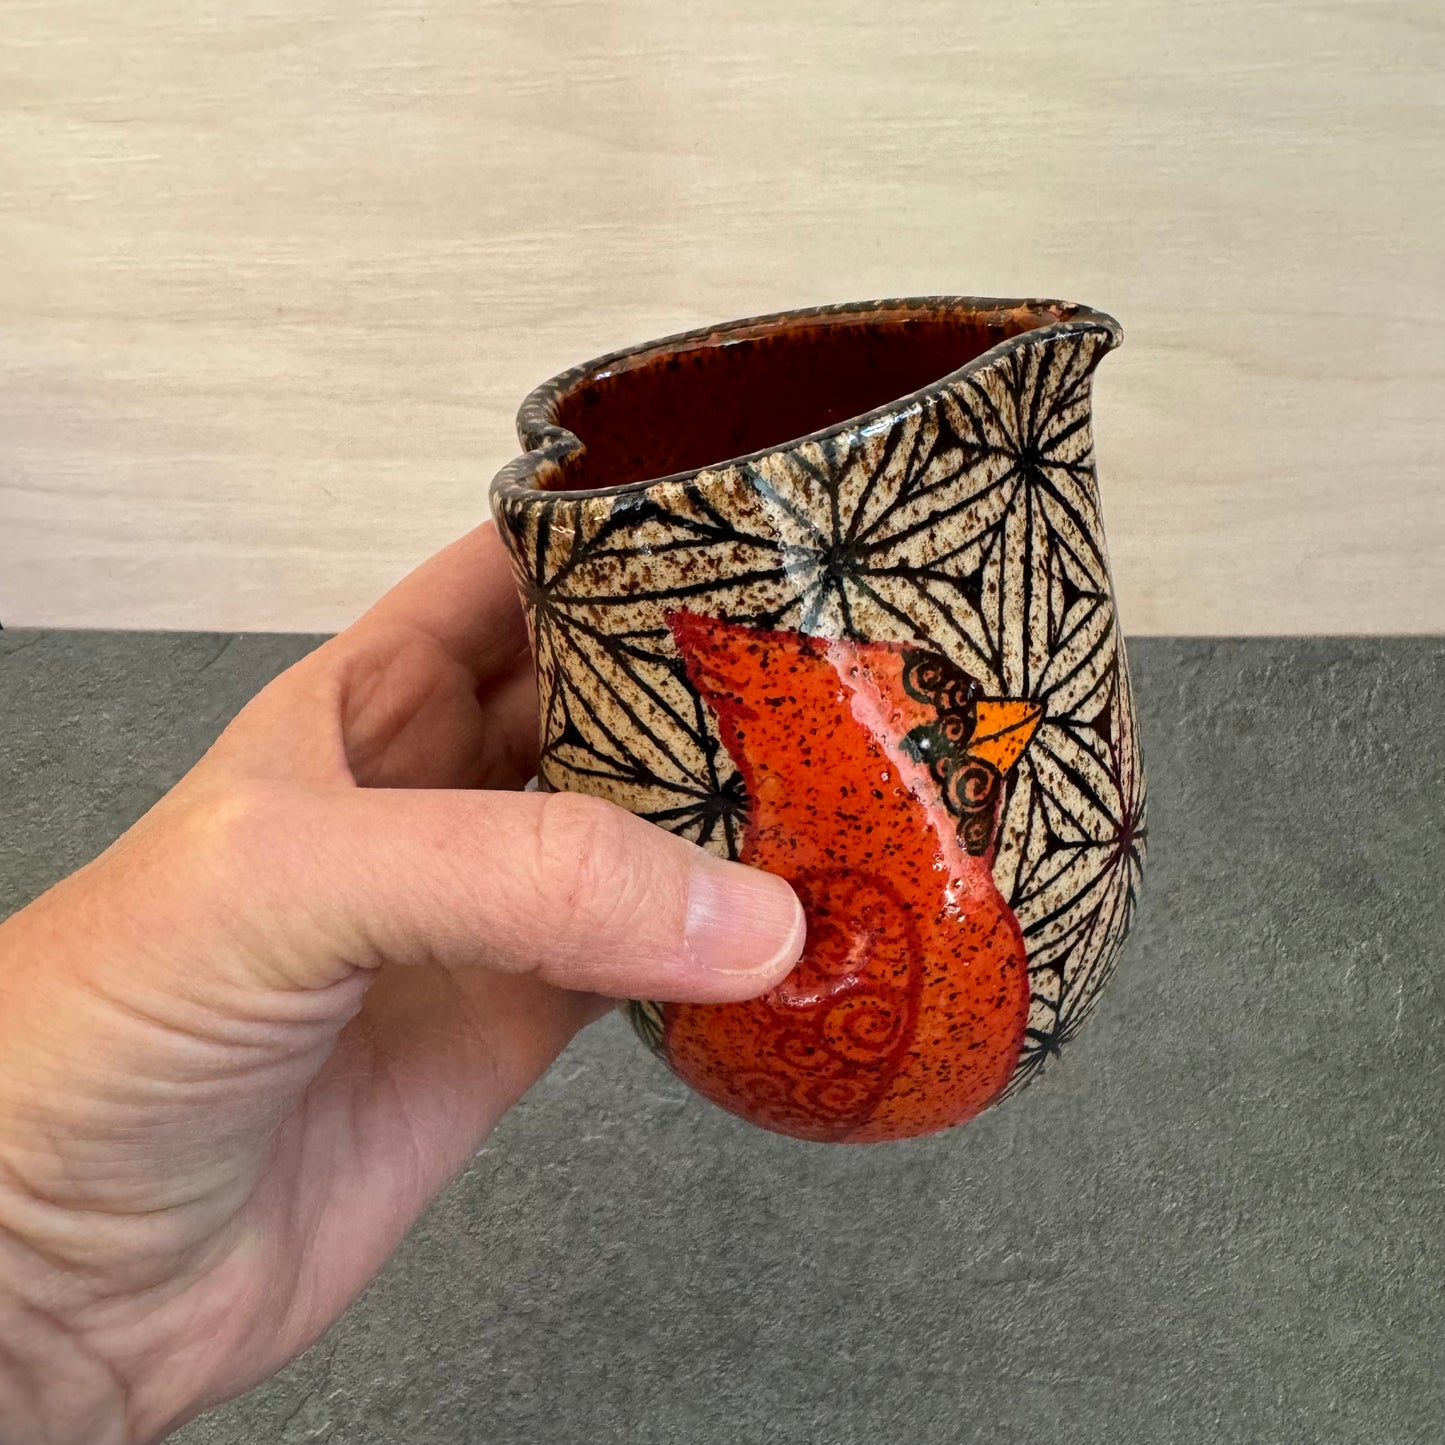 Heart Cup with Red Cardinal